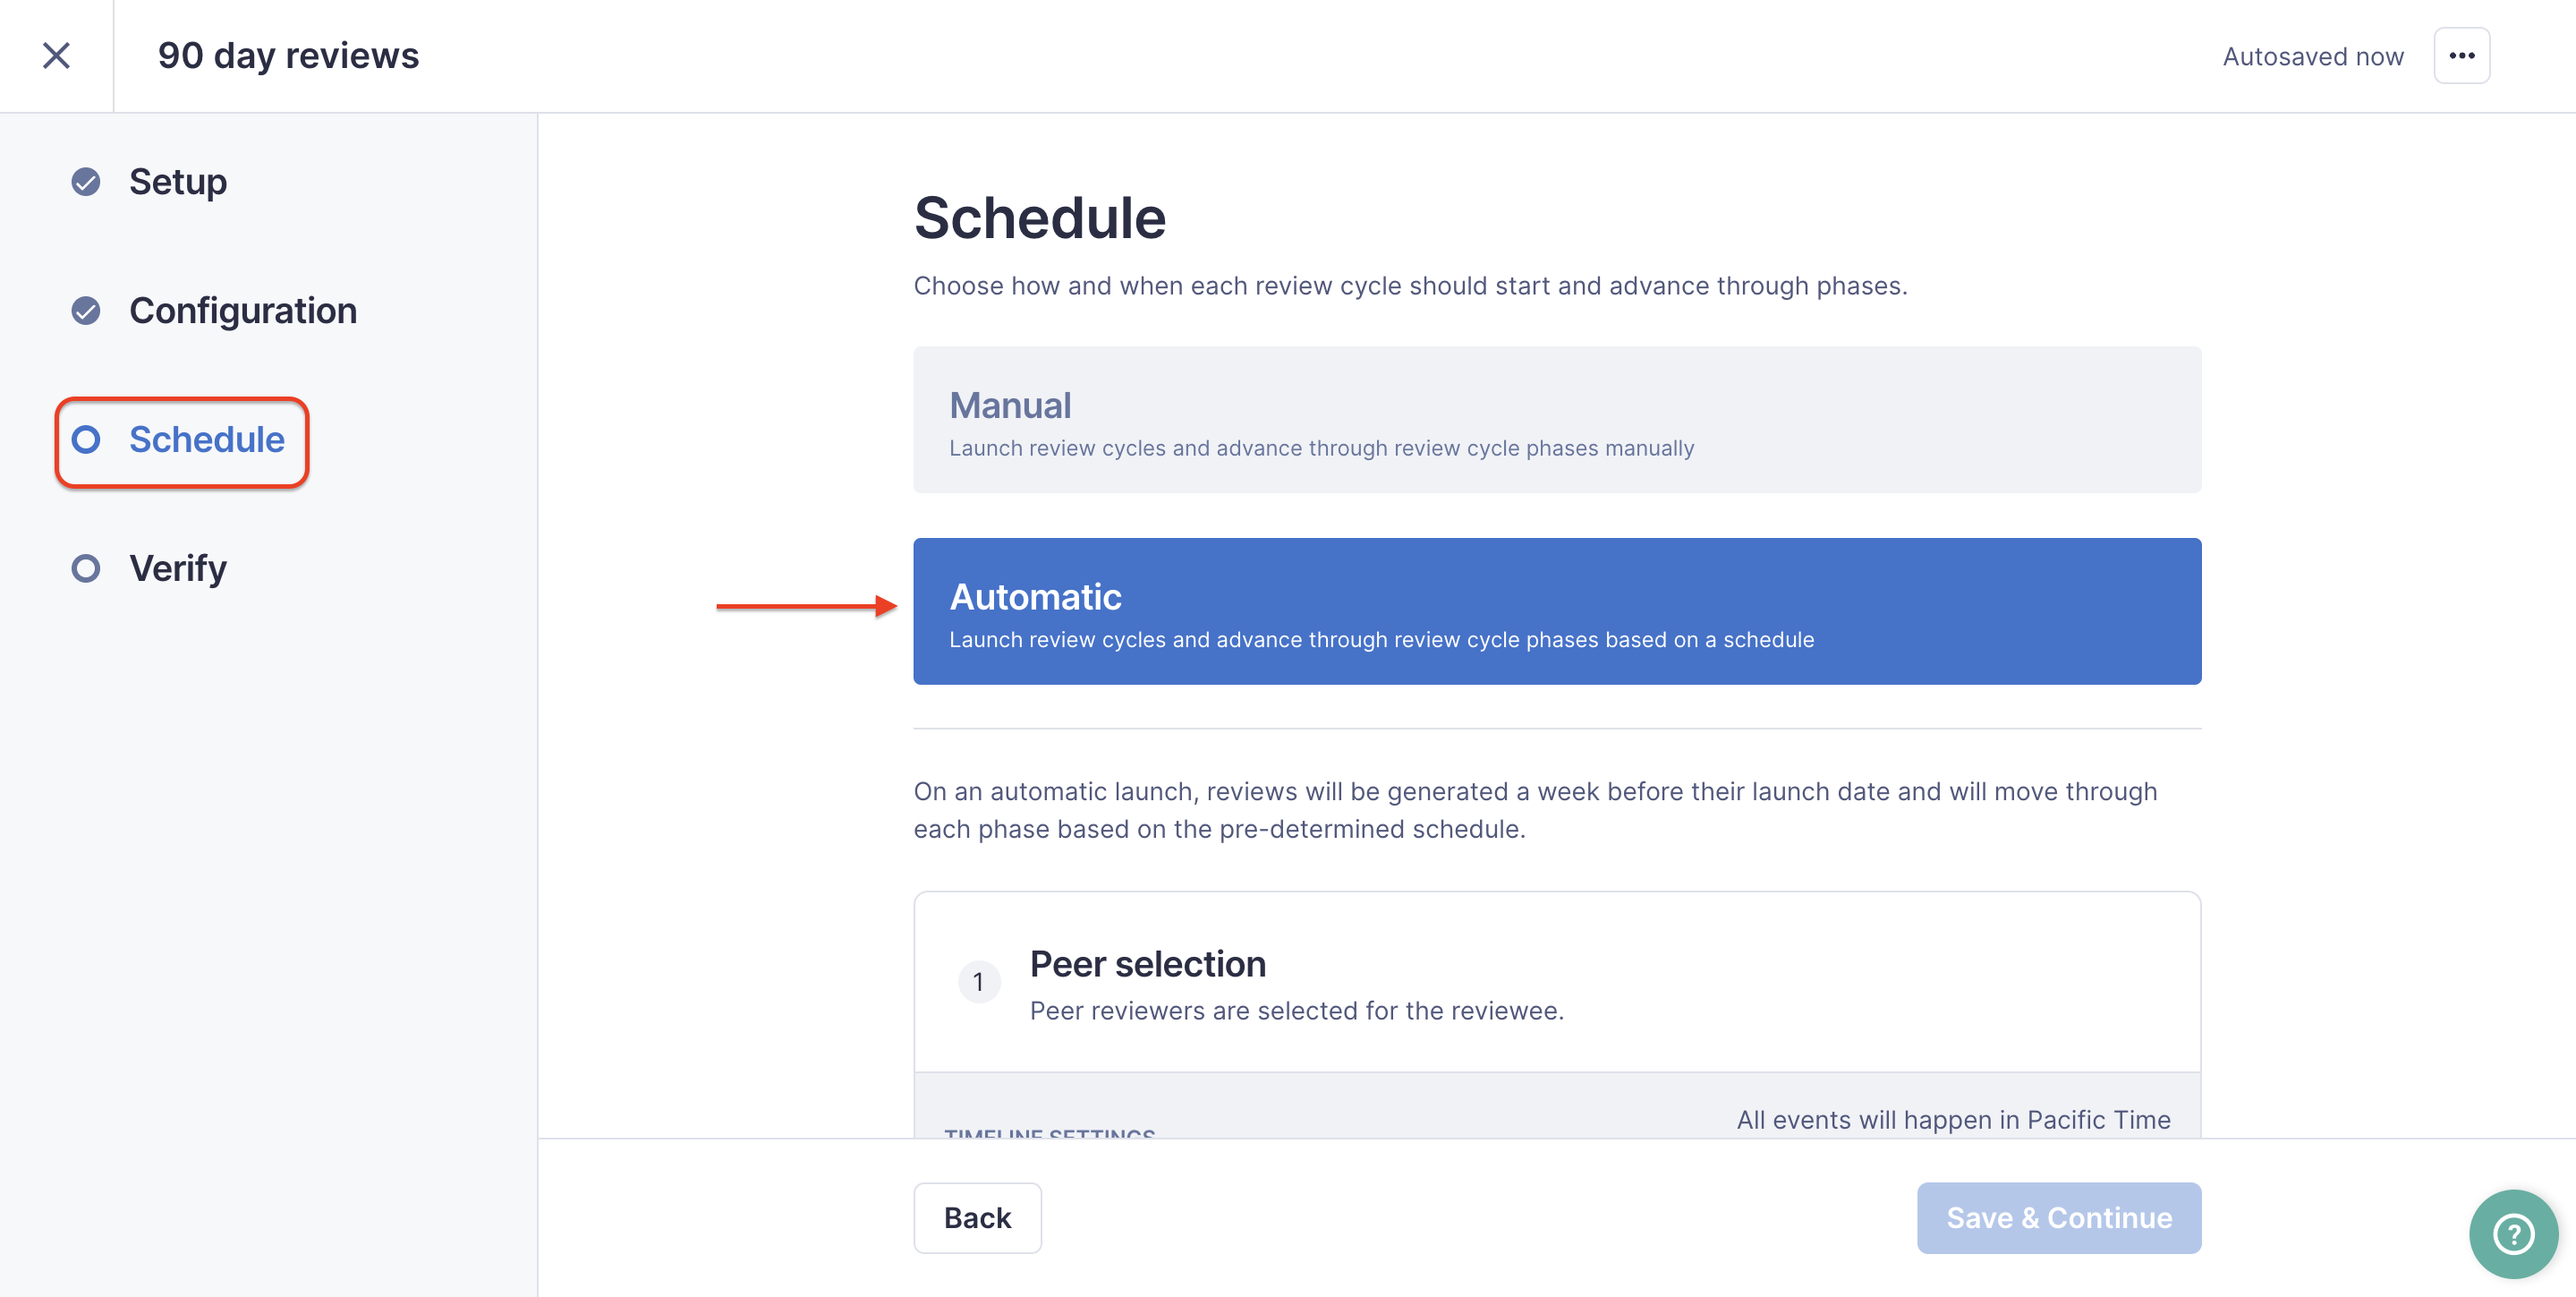 Image of the Automated Rules setup Schedule page with a square highlightging the Schedule section and an arrow highlighting the Automatic option